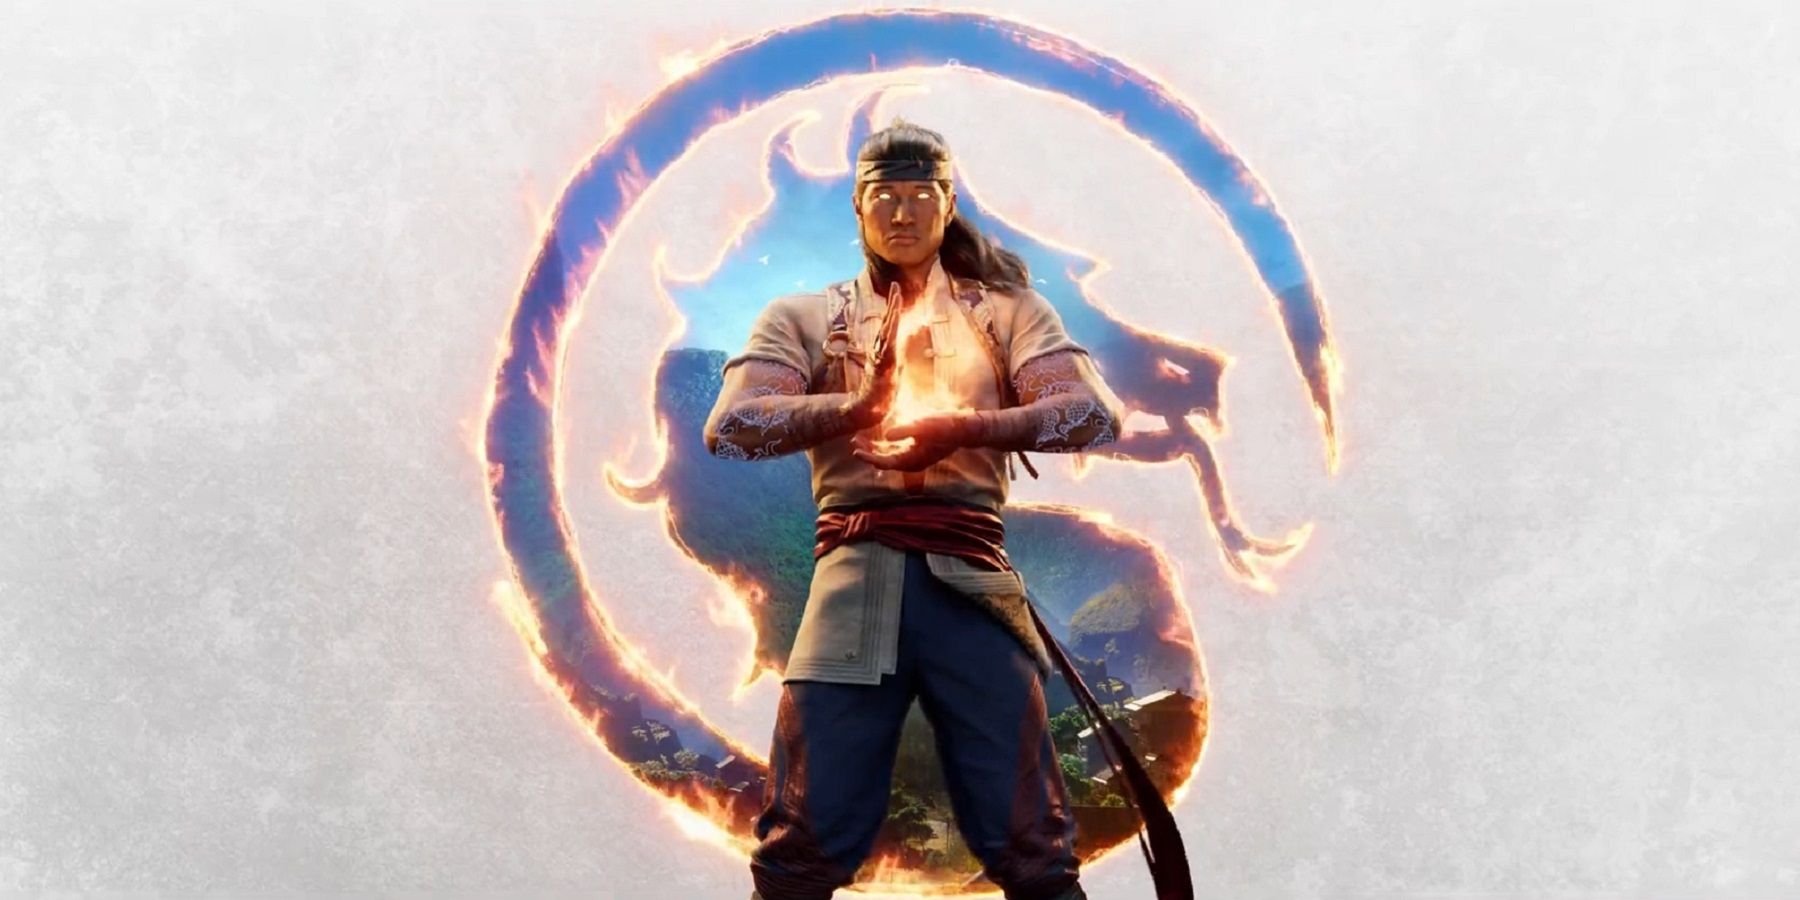 Mortal Kombat 12 Confirms 8 Characters, Release Date, and New Title